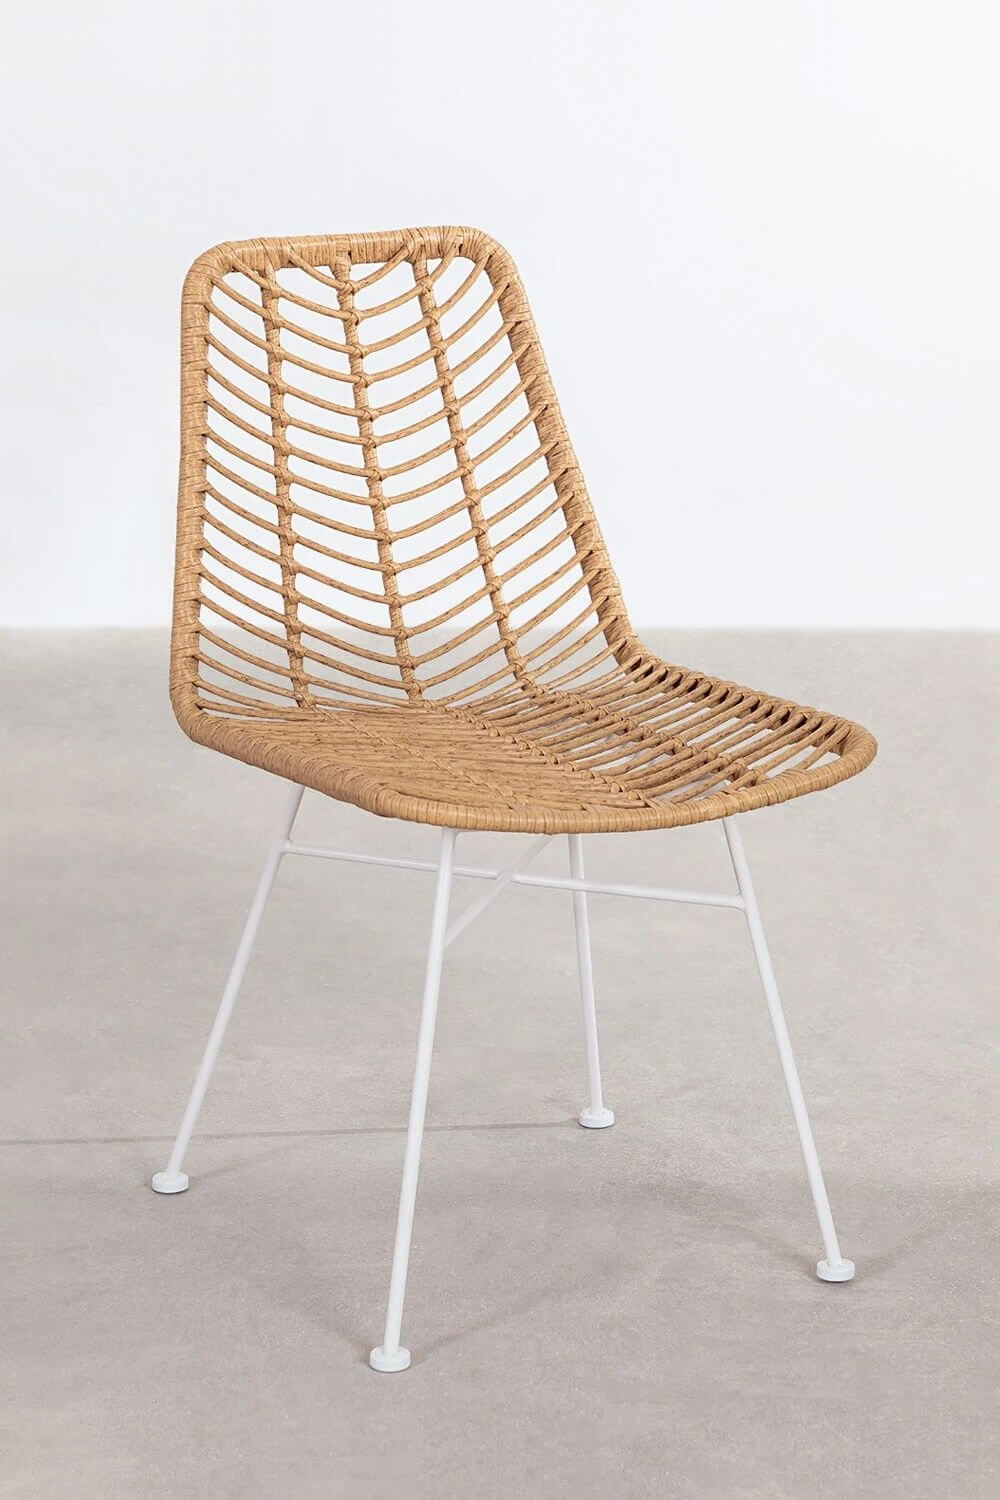 The Essential Rattan Chairs for the Dining Room 